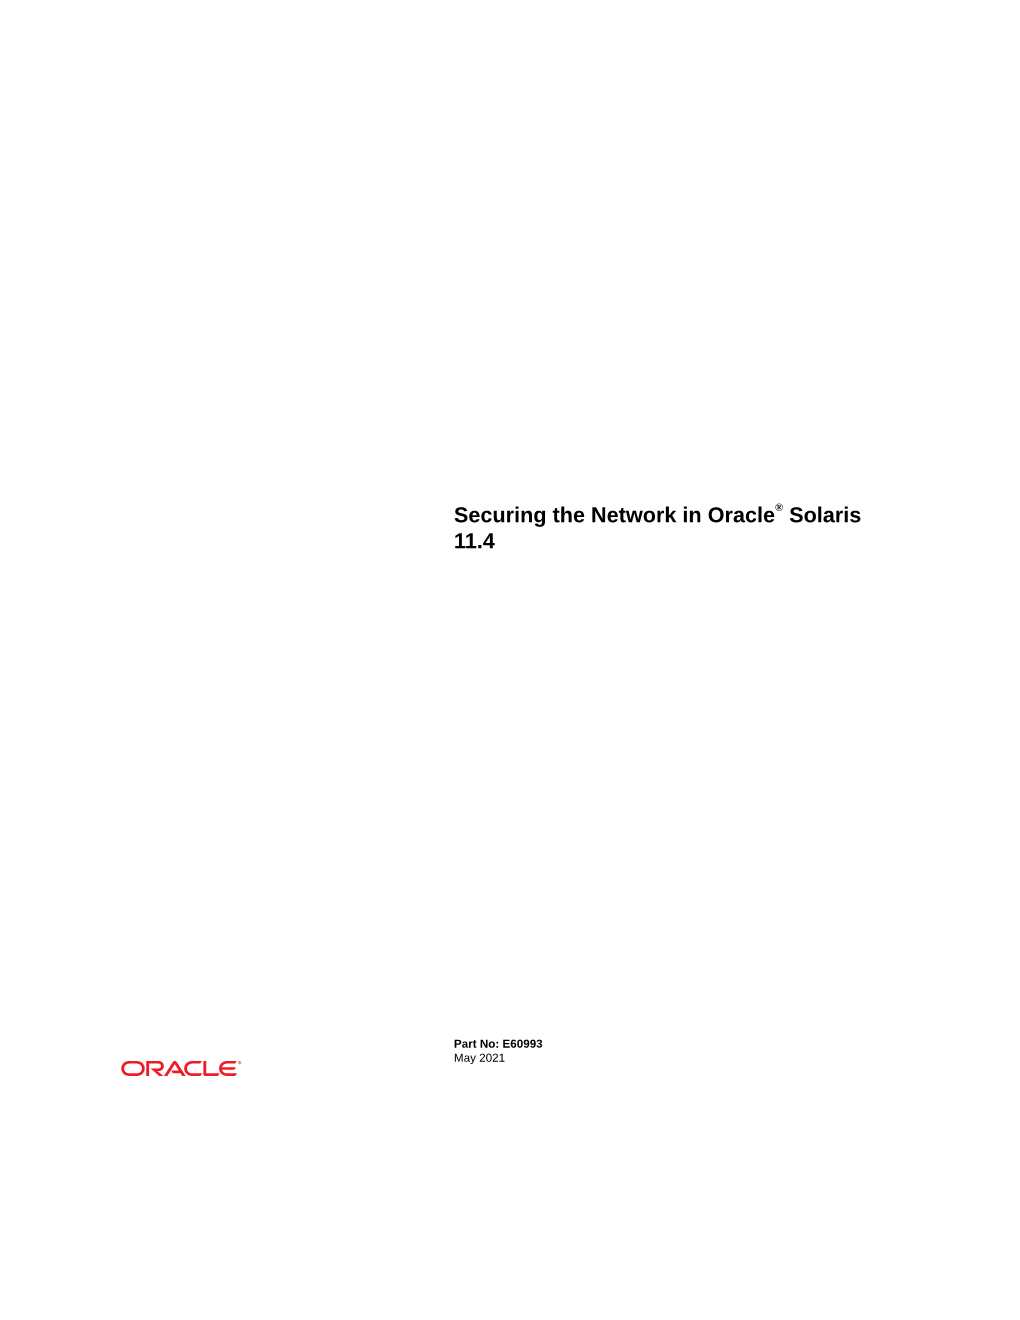 Securing the Network in Oracle® Solaris 11.4